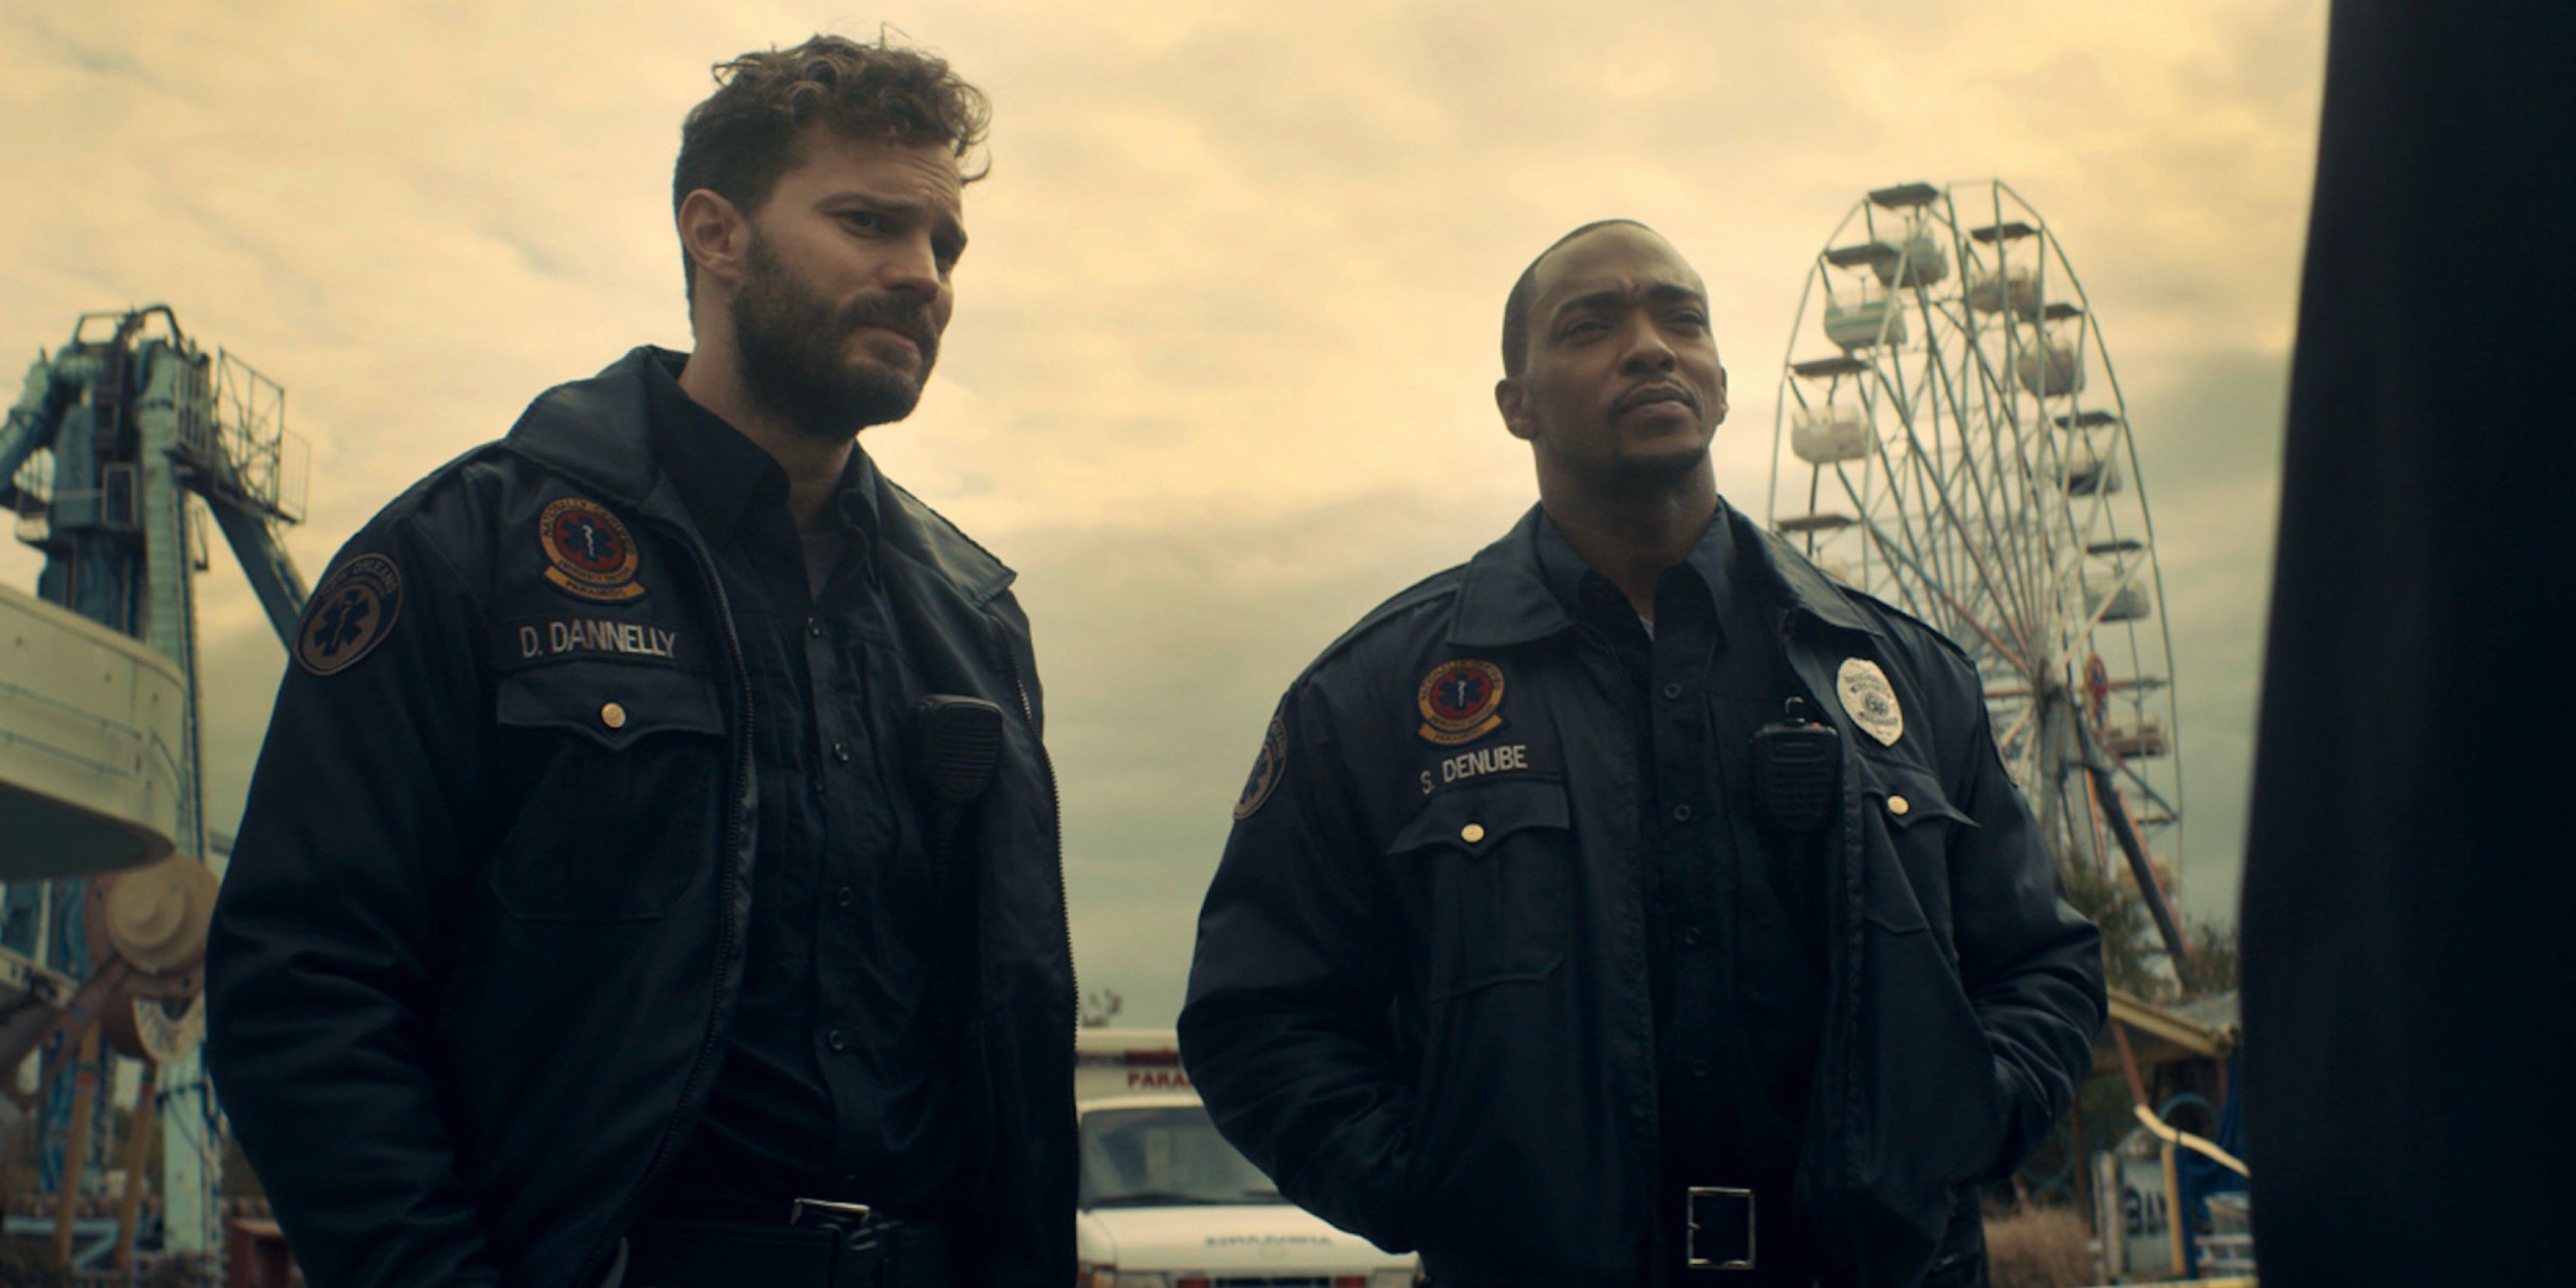 Jamie Dornan as Dennis Dannelly and Anthony Mackie as Steve Denube in Synchronic